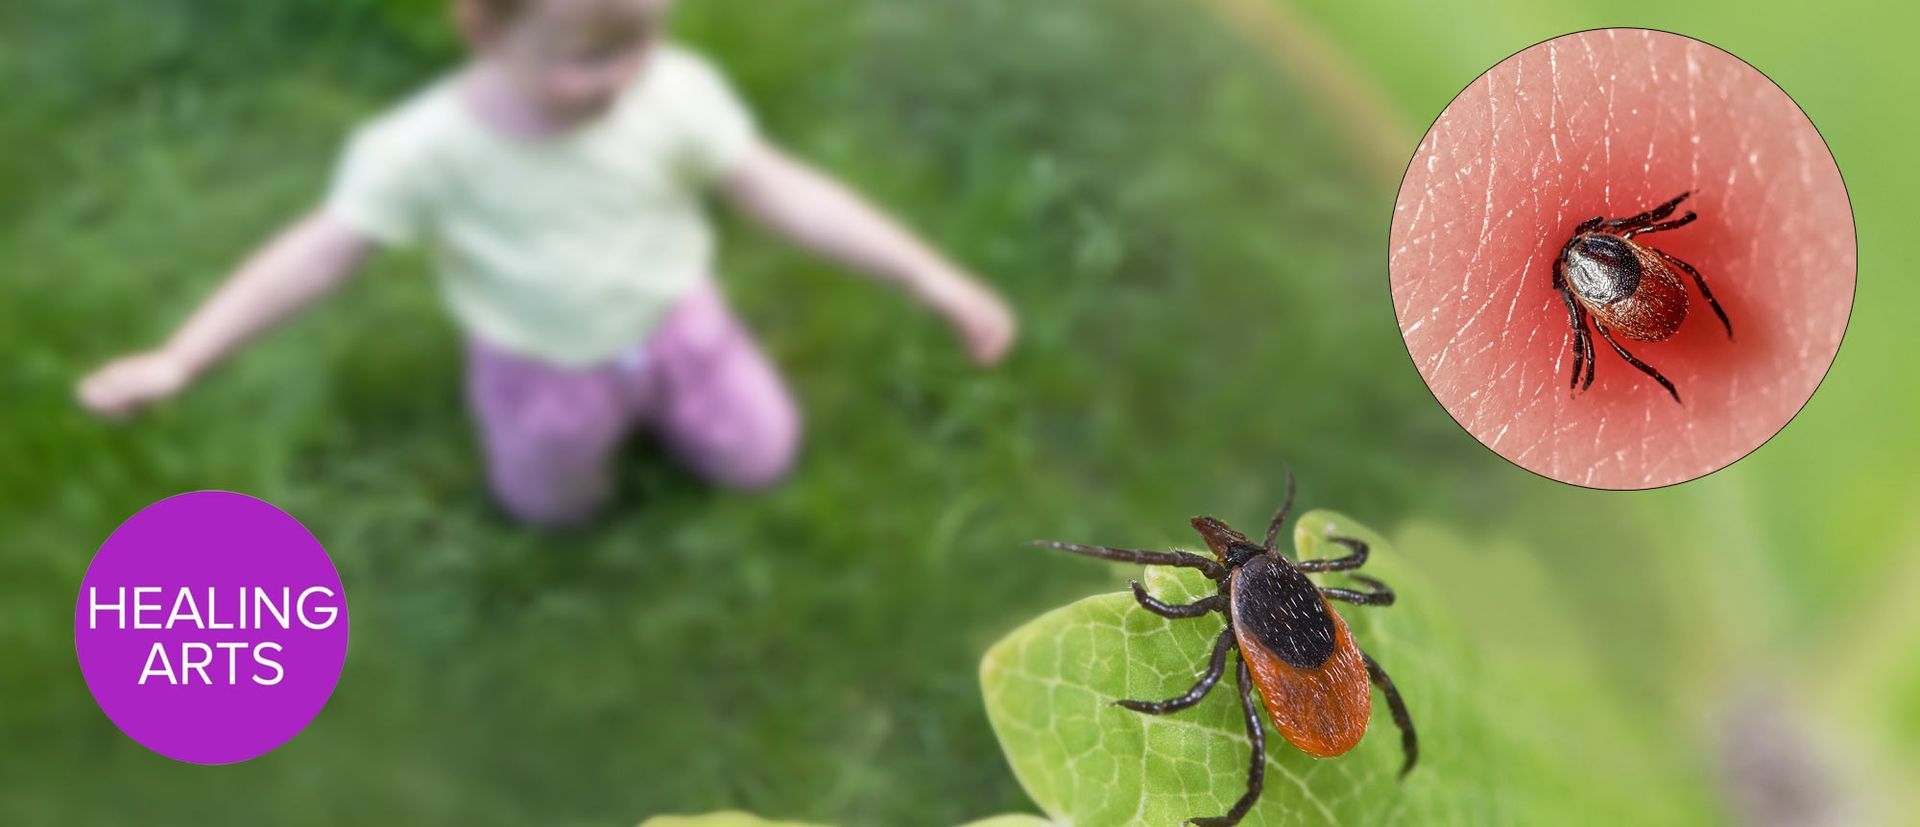 What You Should Know About Lyme Disease as the Season Approaches